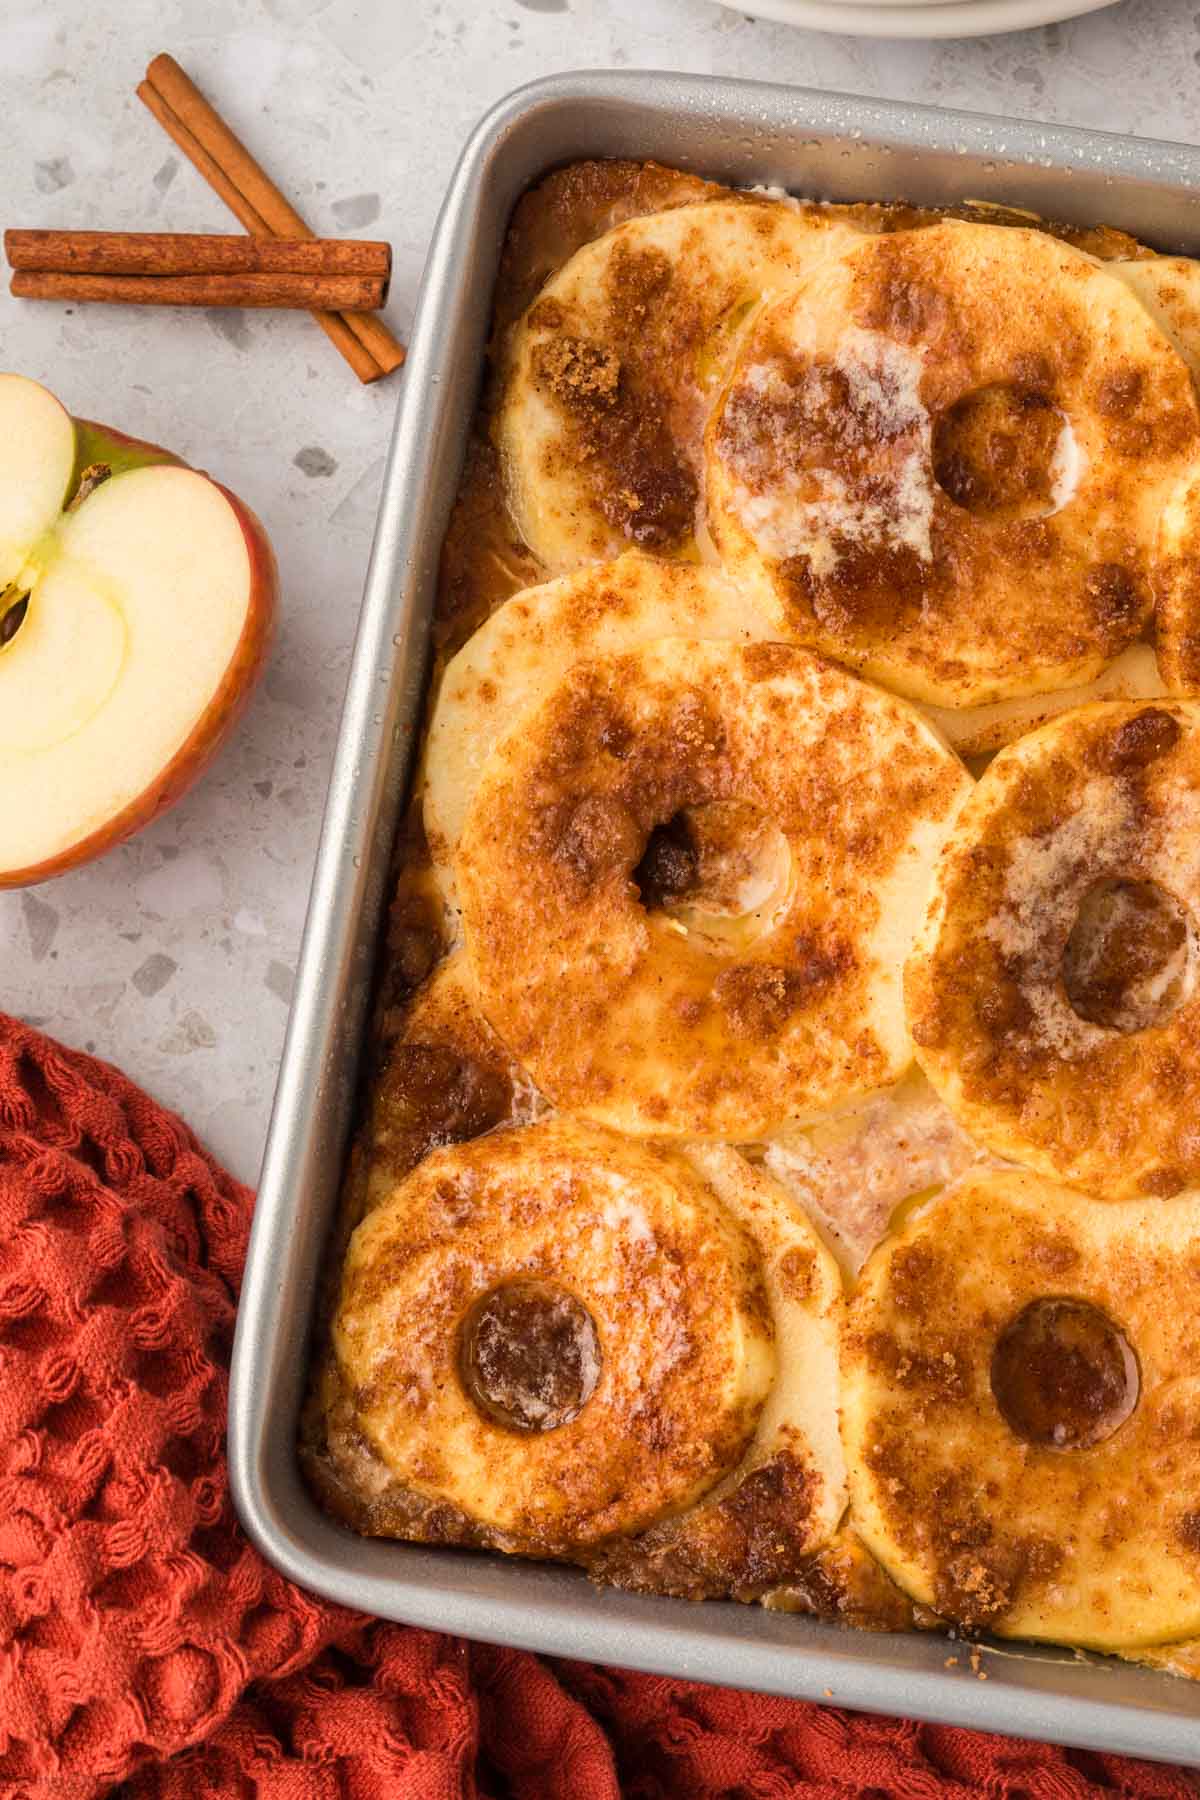 Sweet potato and apple casserole in a baking dish